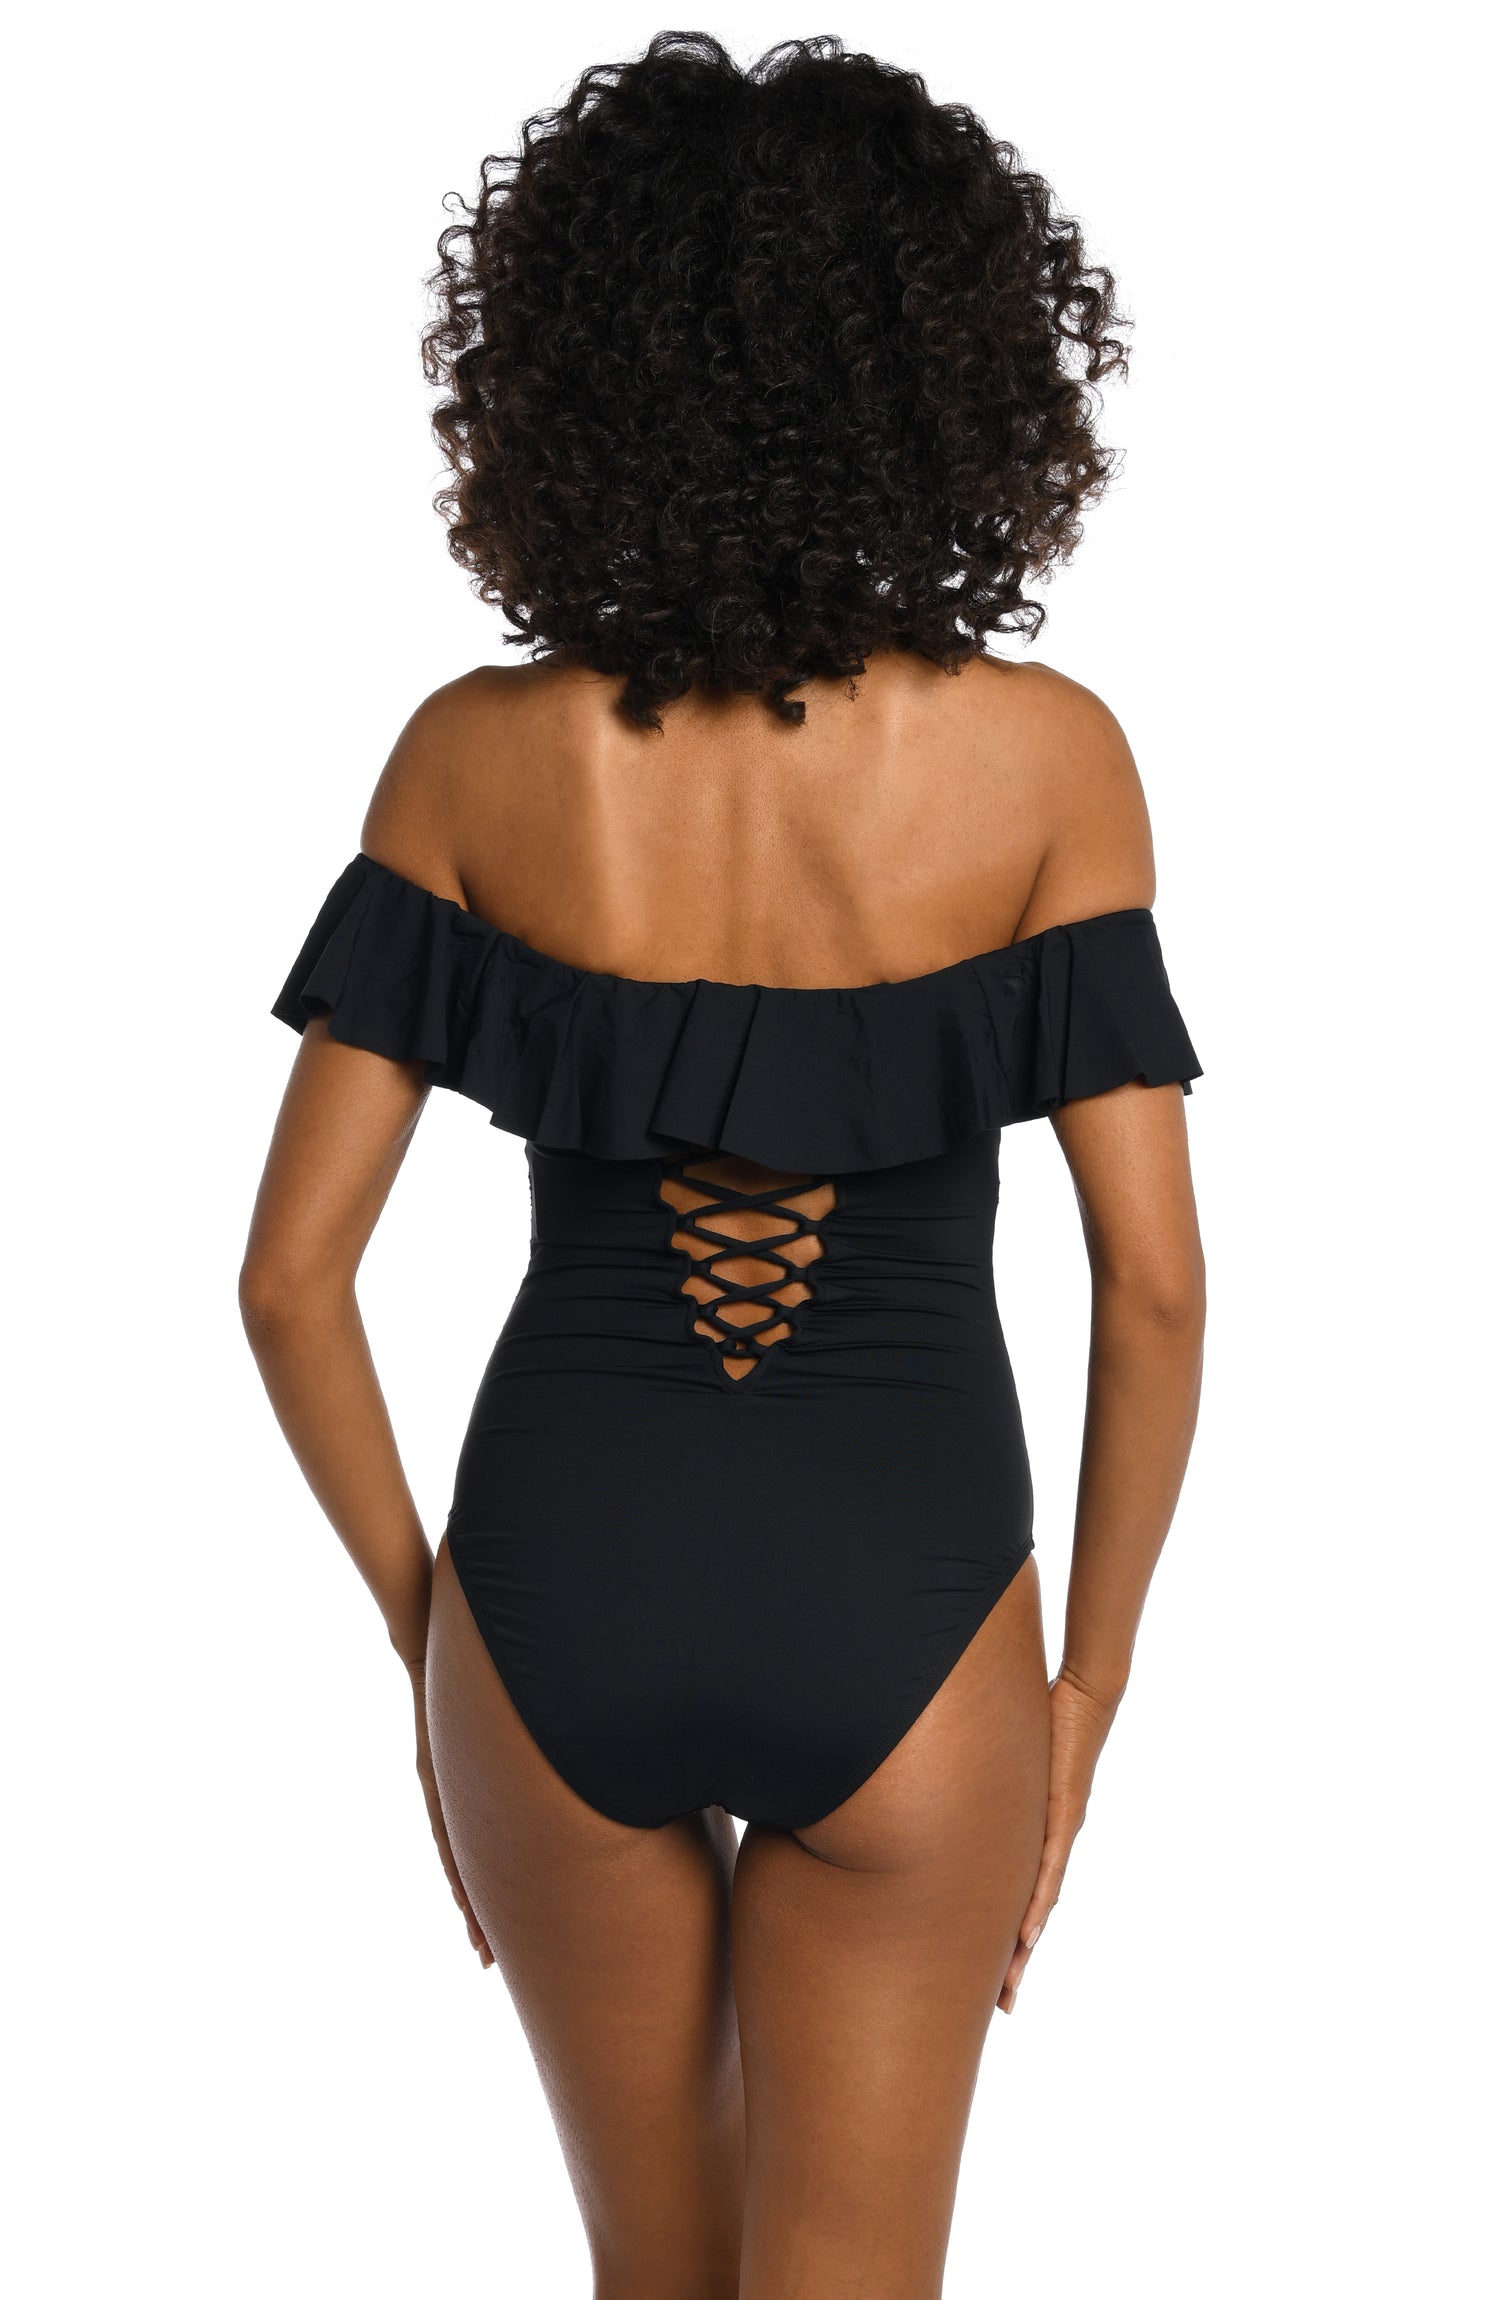 Model is wearing a black one piece swimsuit from our Best-Selling Island Goddess collection.